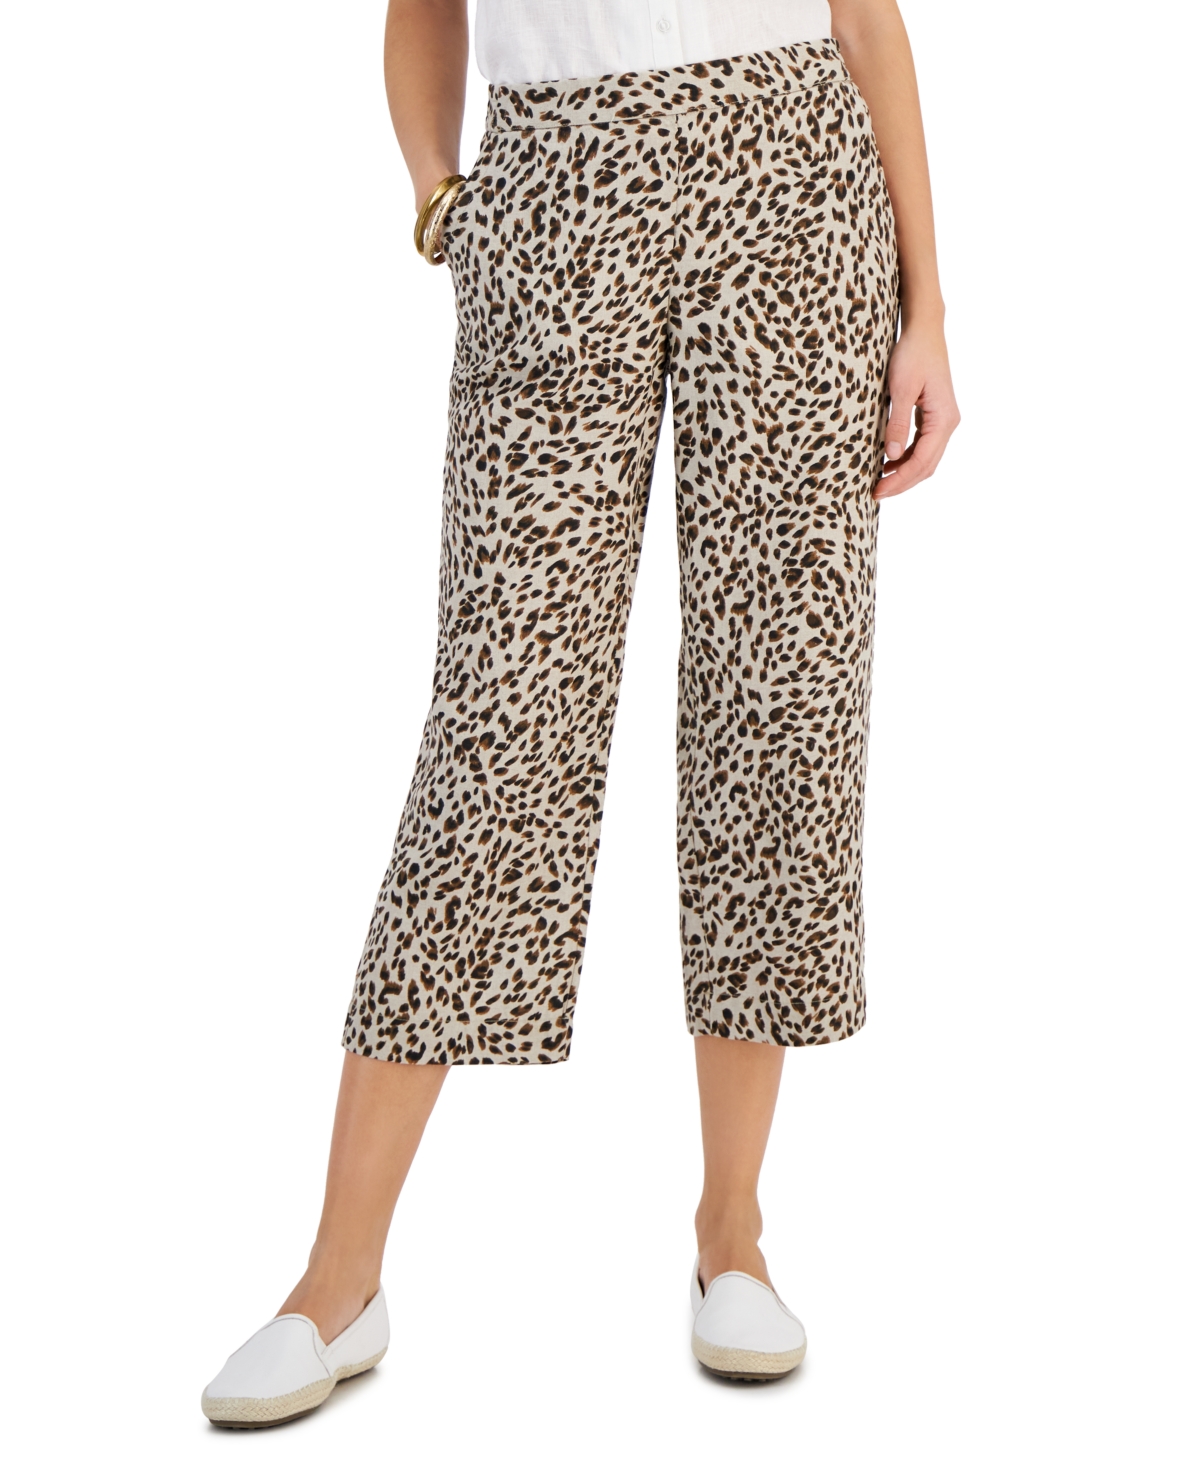 Women's 100% Linen Printed Cropped Pull-On Pants, Created for Macy's - Flax Combo